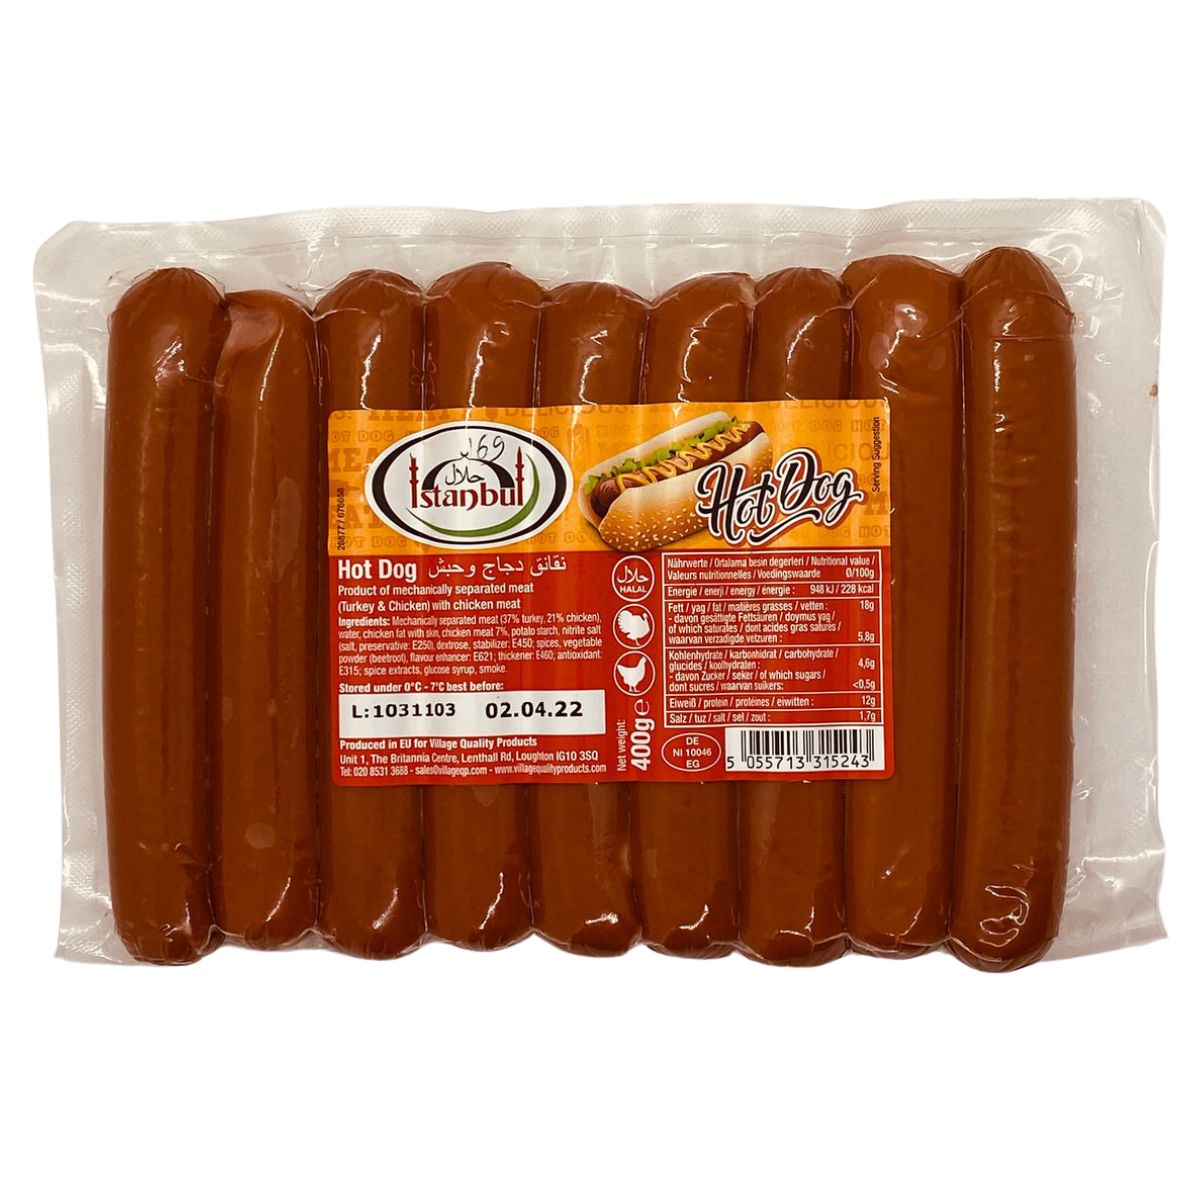 Istanbul - Beef Hot Dogs (Halal) in a plastic bag on a white background.